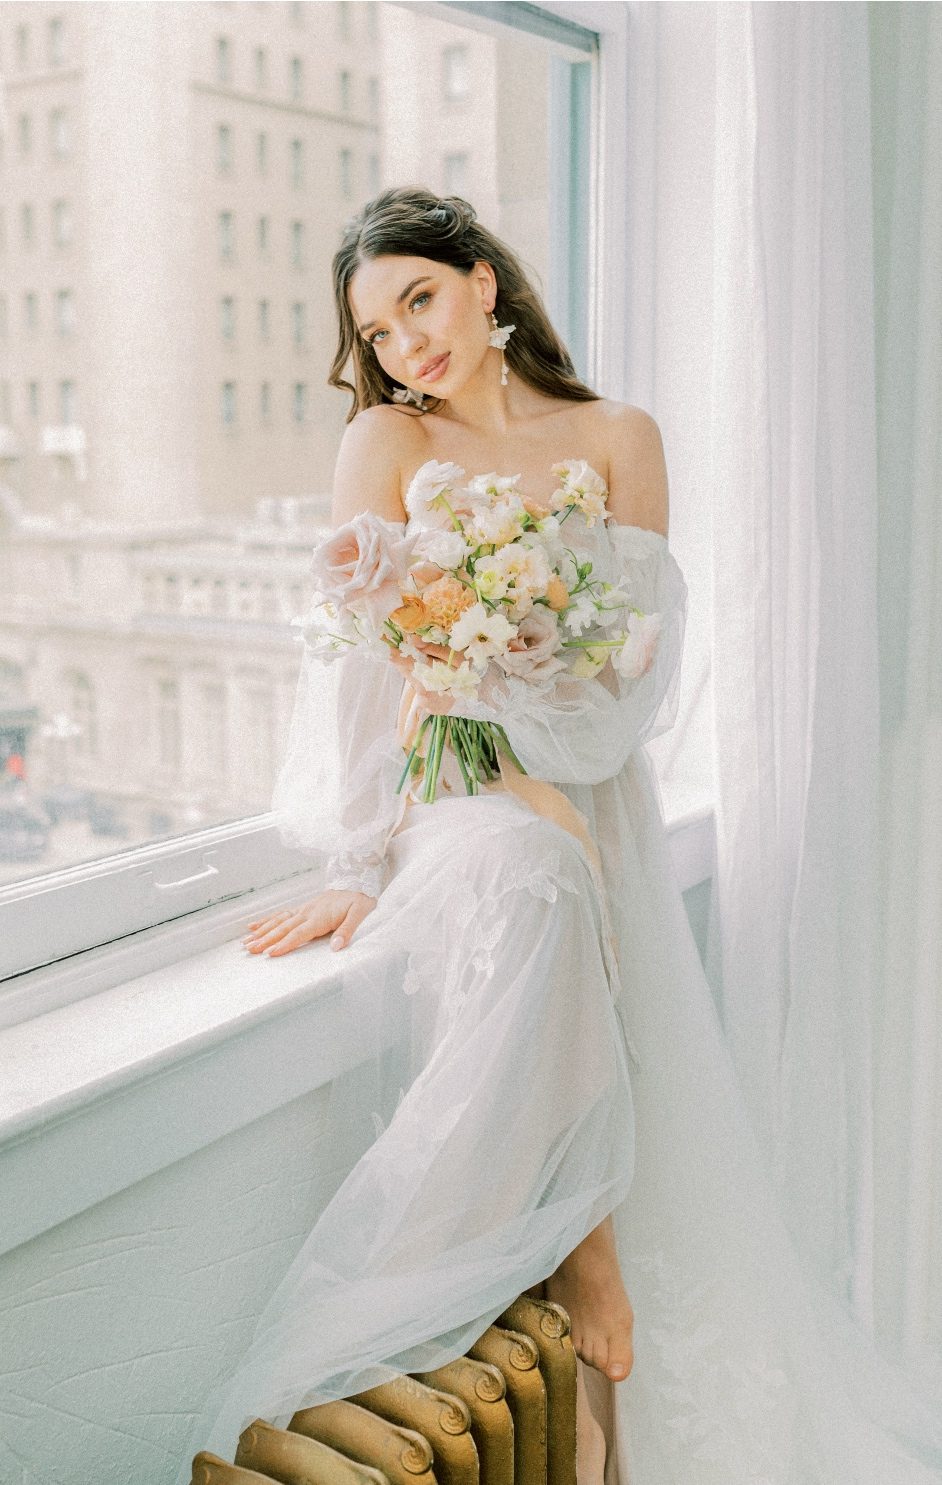 A Calyx Floral Design model sits on a window sill holding on to her peach and blush bouquet